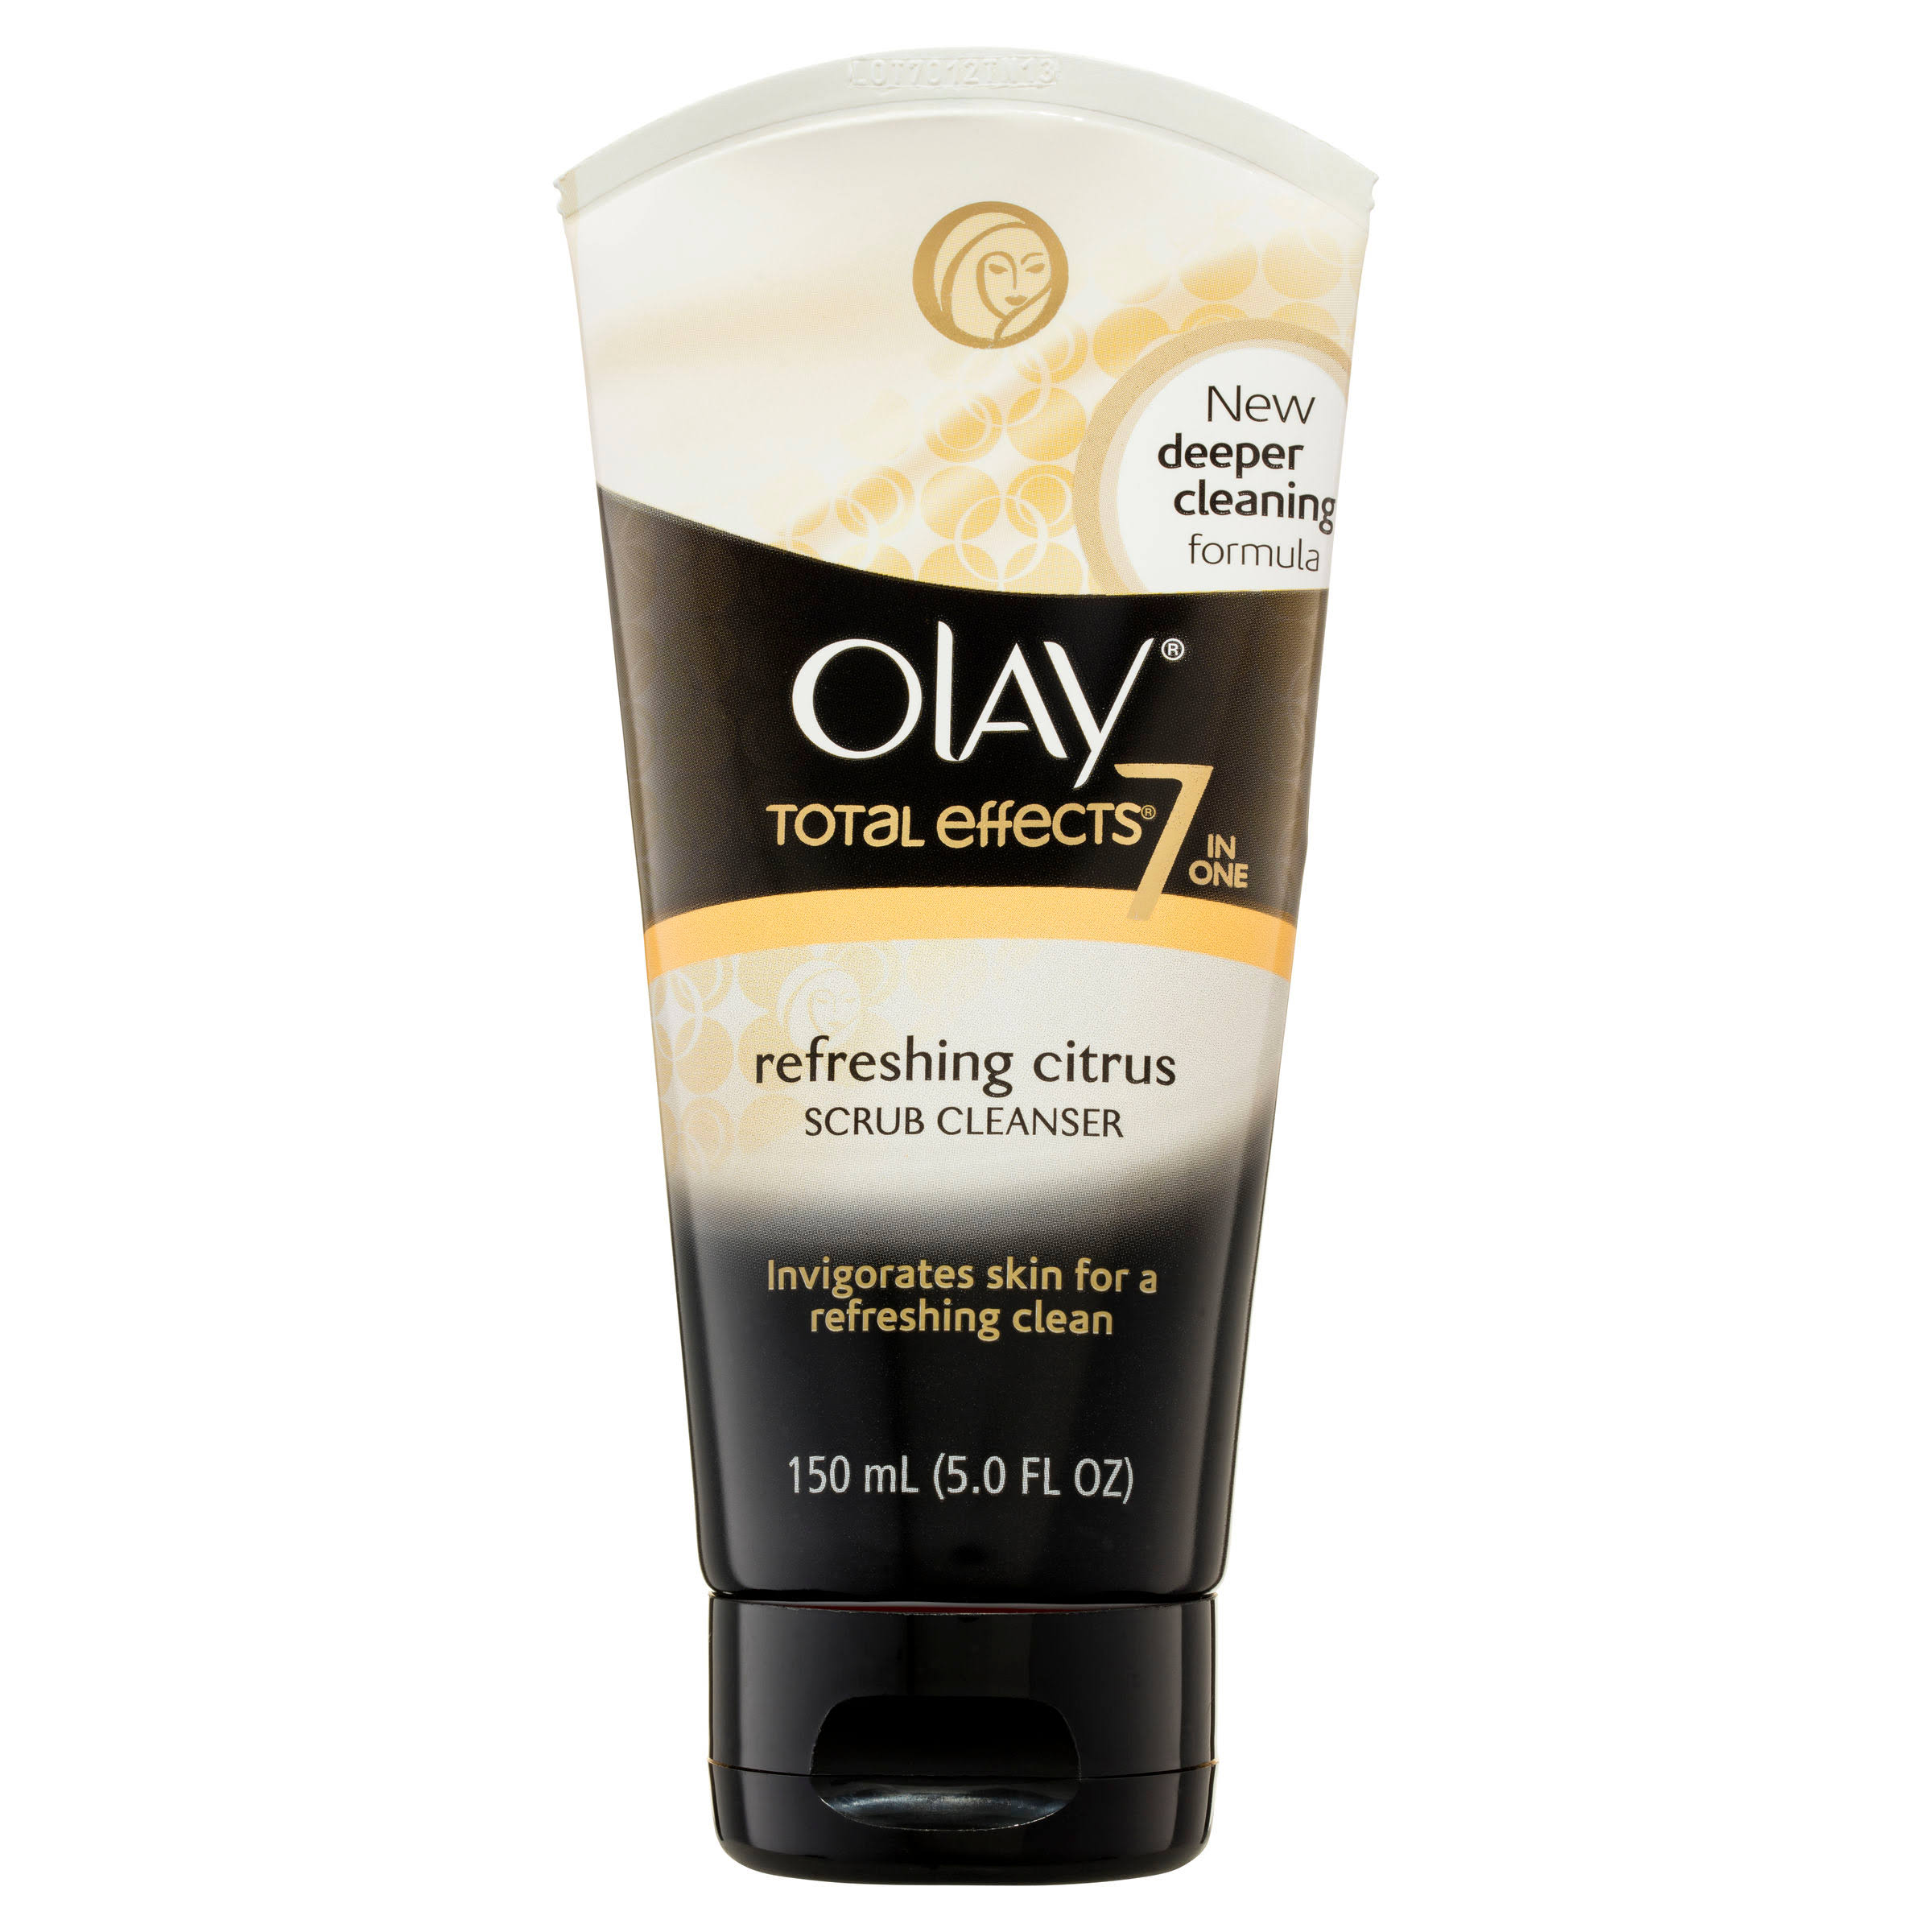 Olay Total Effects 7 in One Scrub Cleanser - Refreshing Citrus, 5oz